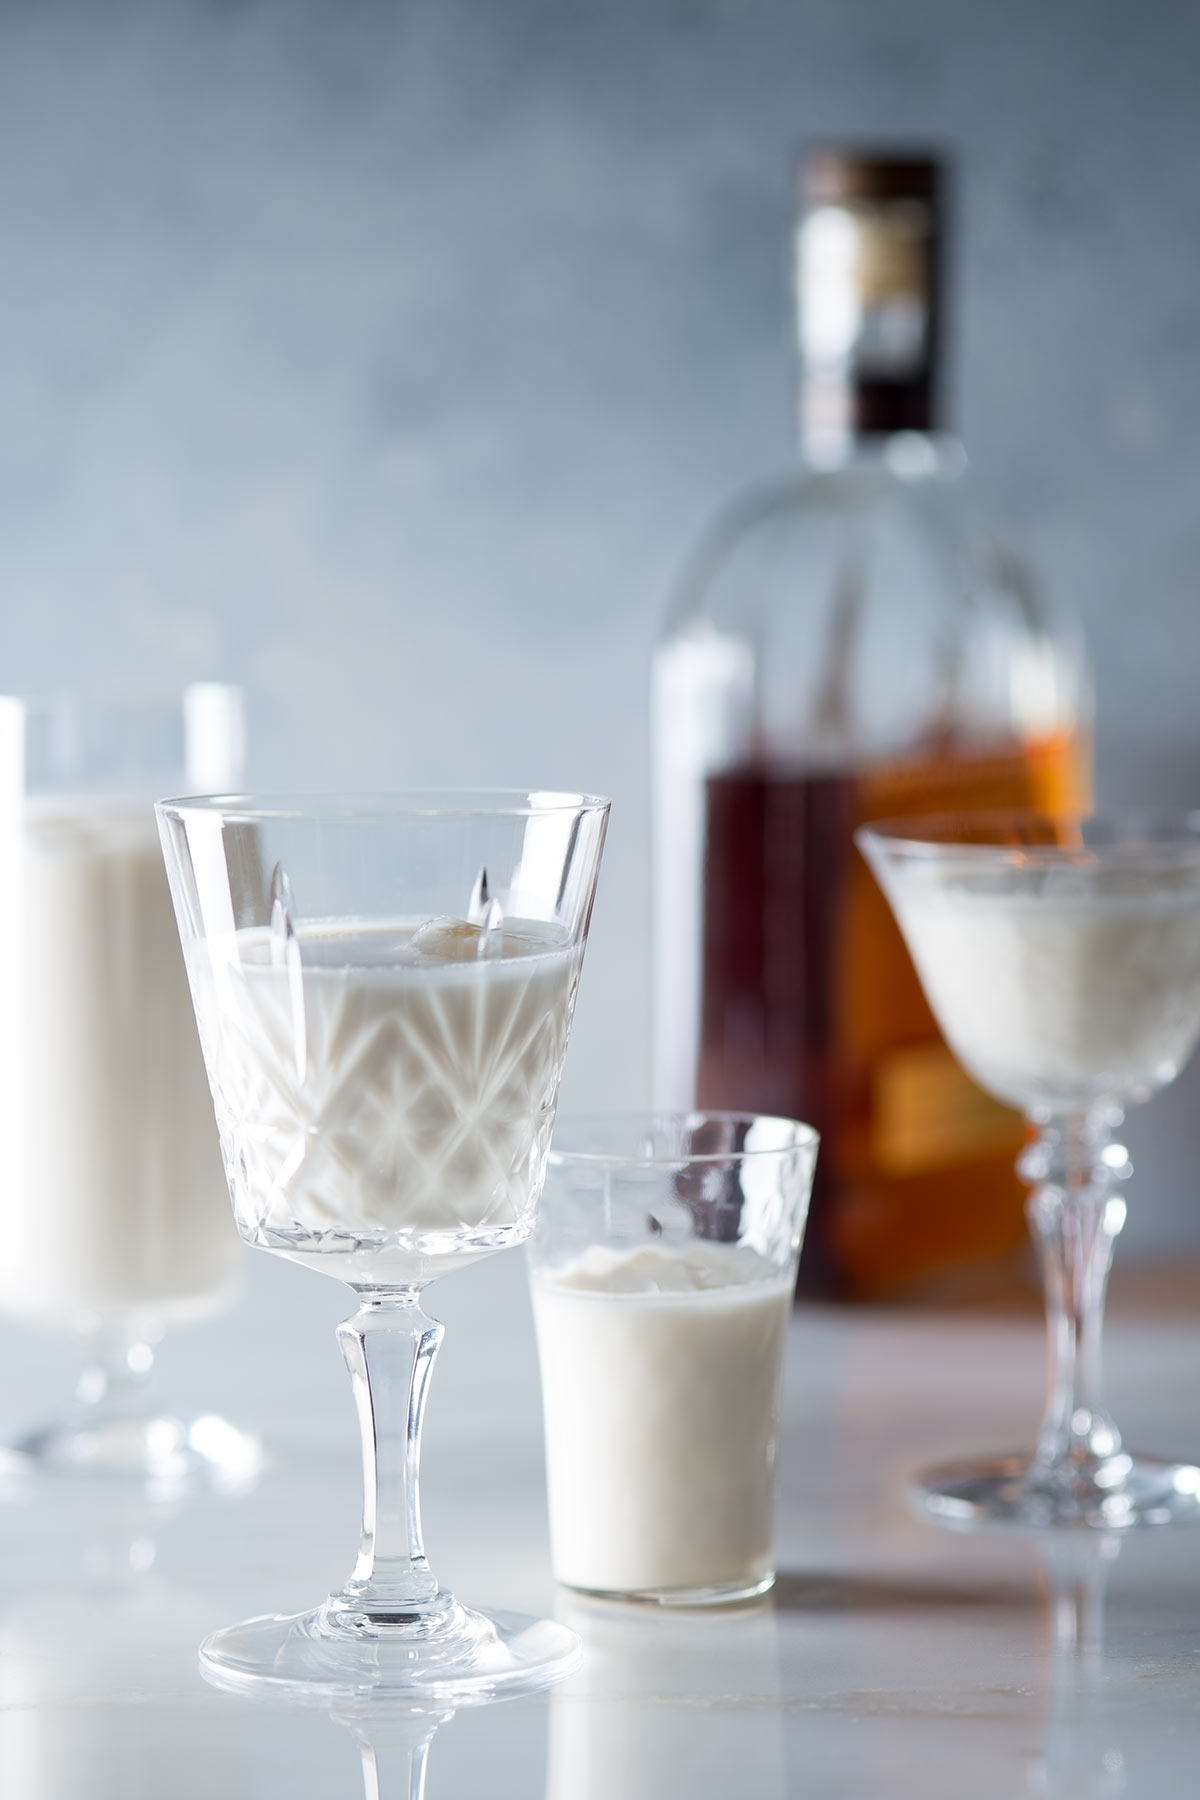 Bourbon milk punch in glasses and a bottle of Bourbon.